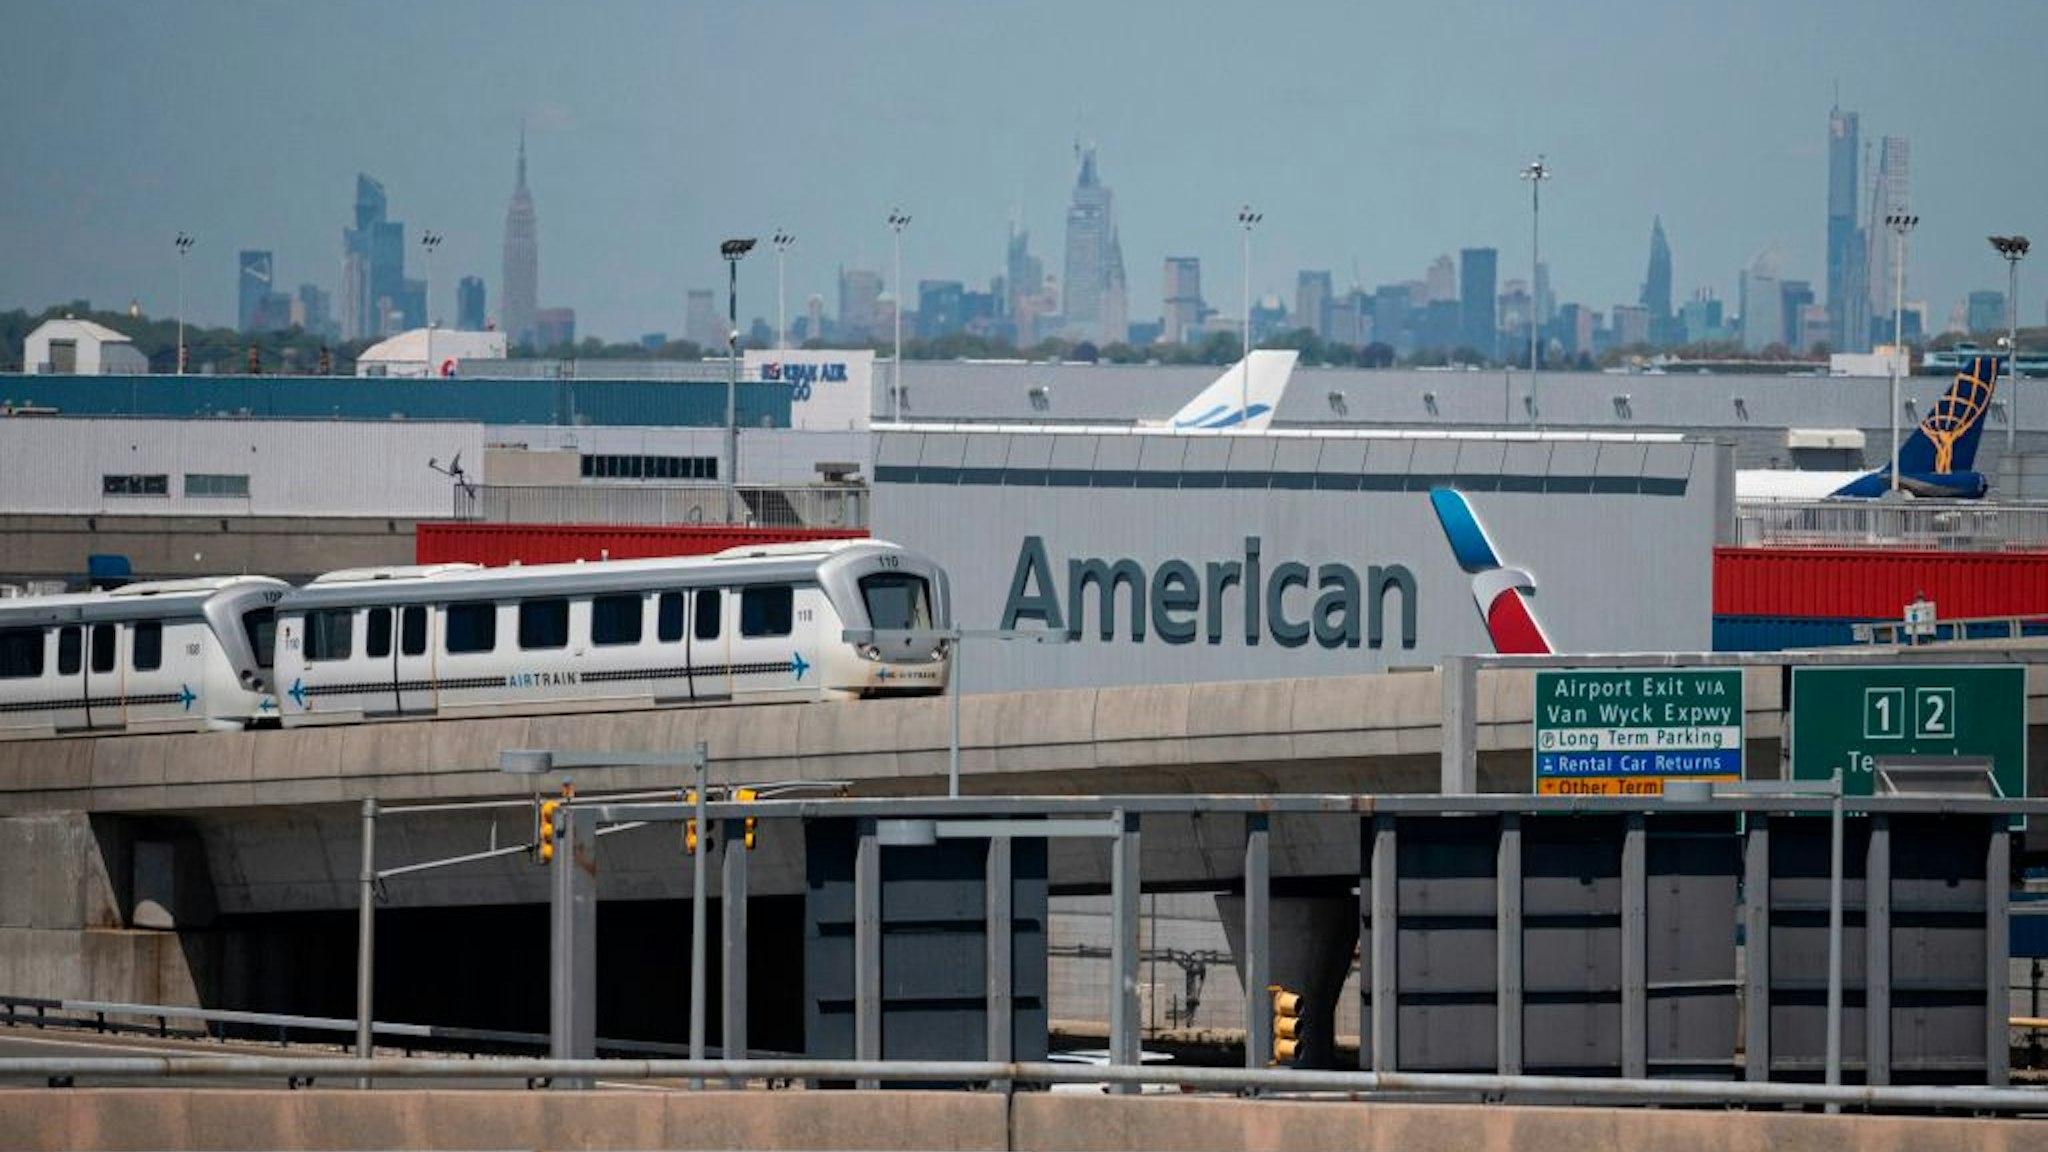 The American Airlines logo is seen at John F. Kennedy Airport (JFK) is seen amid the novel coronavirus pandemic on May 13, 2020 in Queens, New York. (Photo by Johannes EISELE / AFP) (Photo by JOHANNES EISELE/AFP via Getty Images)